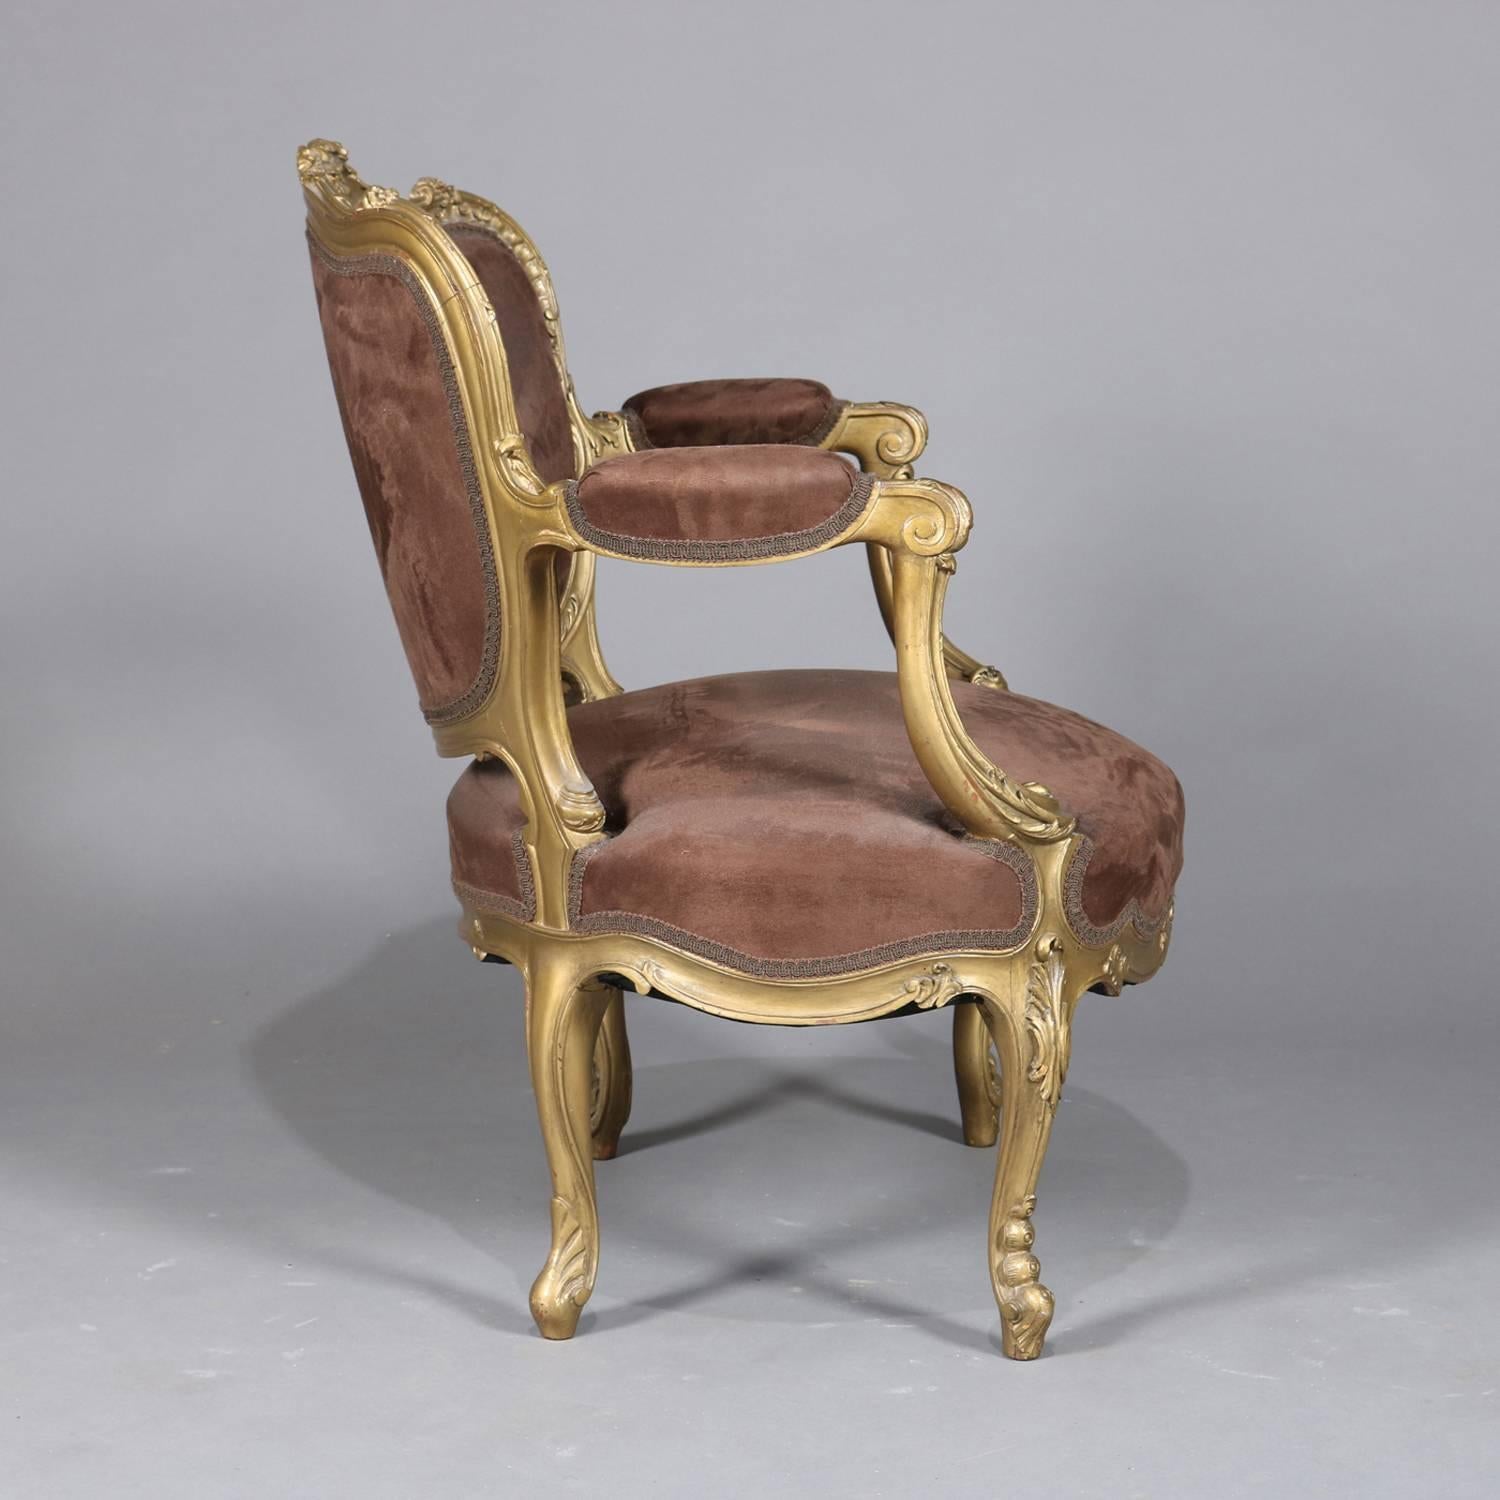 Upholstery Antique French Louis XV Carved Giltwood Large Fauteuil ‘Chair-and-a-Half’